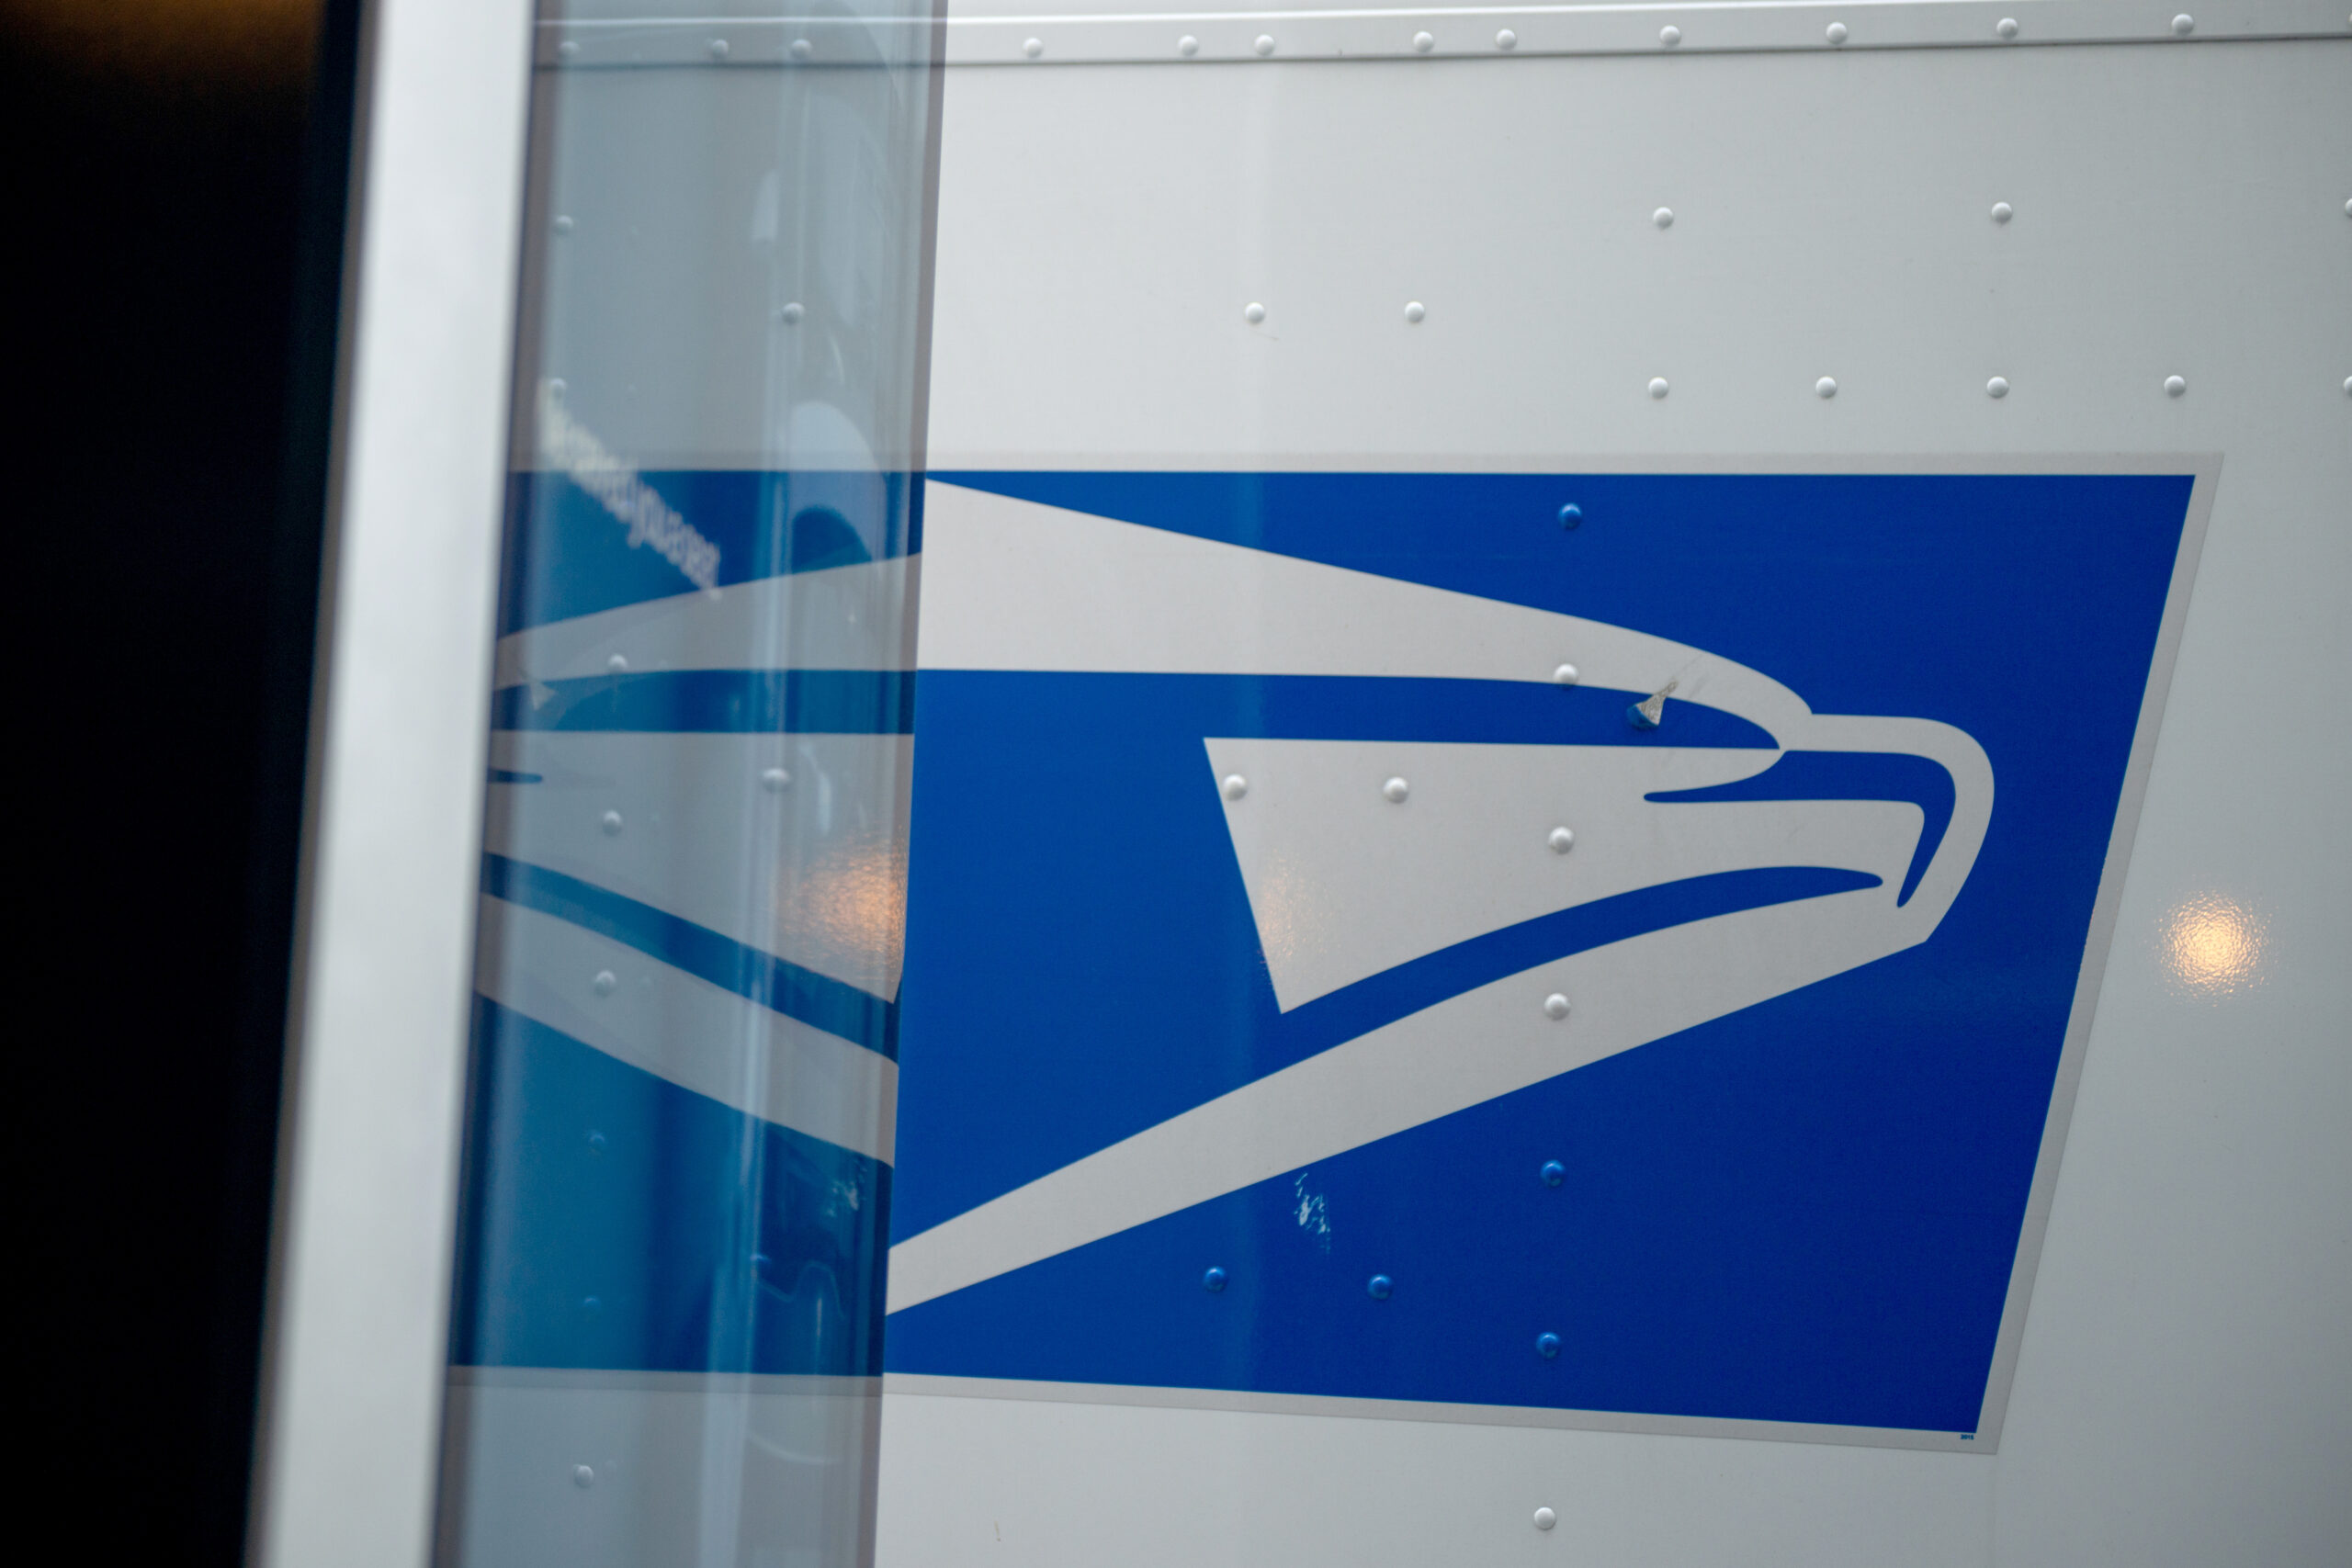 Changes Made To The US Postal Service Will Be Postponed Until After The 2020 Election